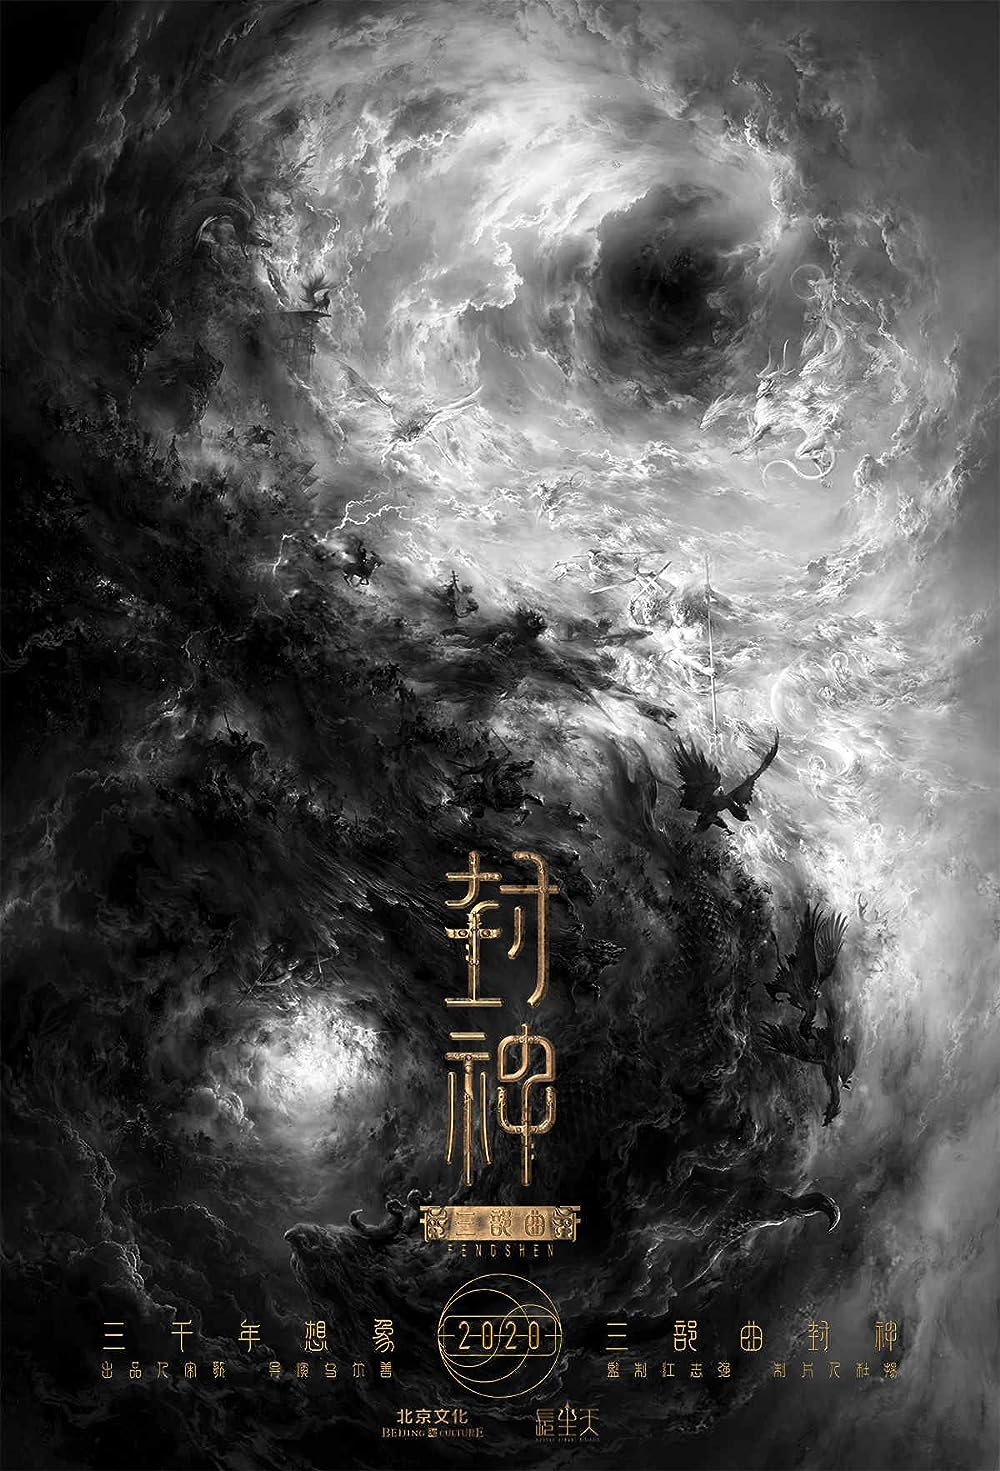 Creation of the Gods I: Kingdom of Storms Movie Poster